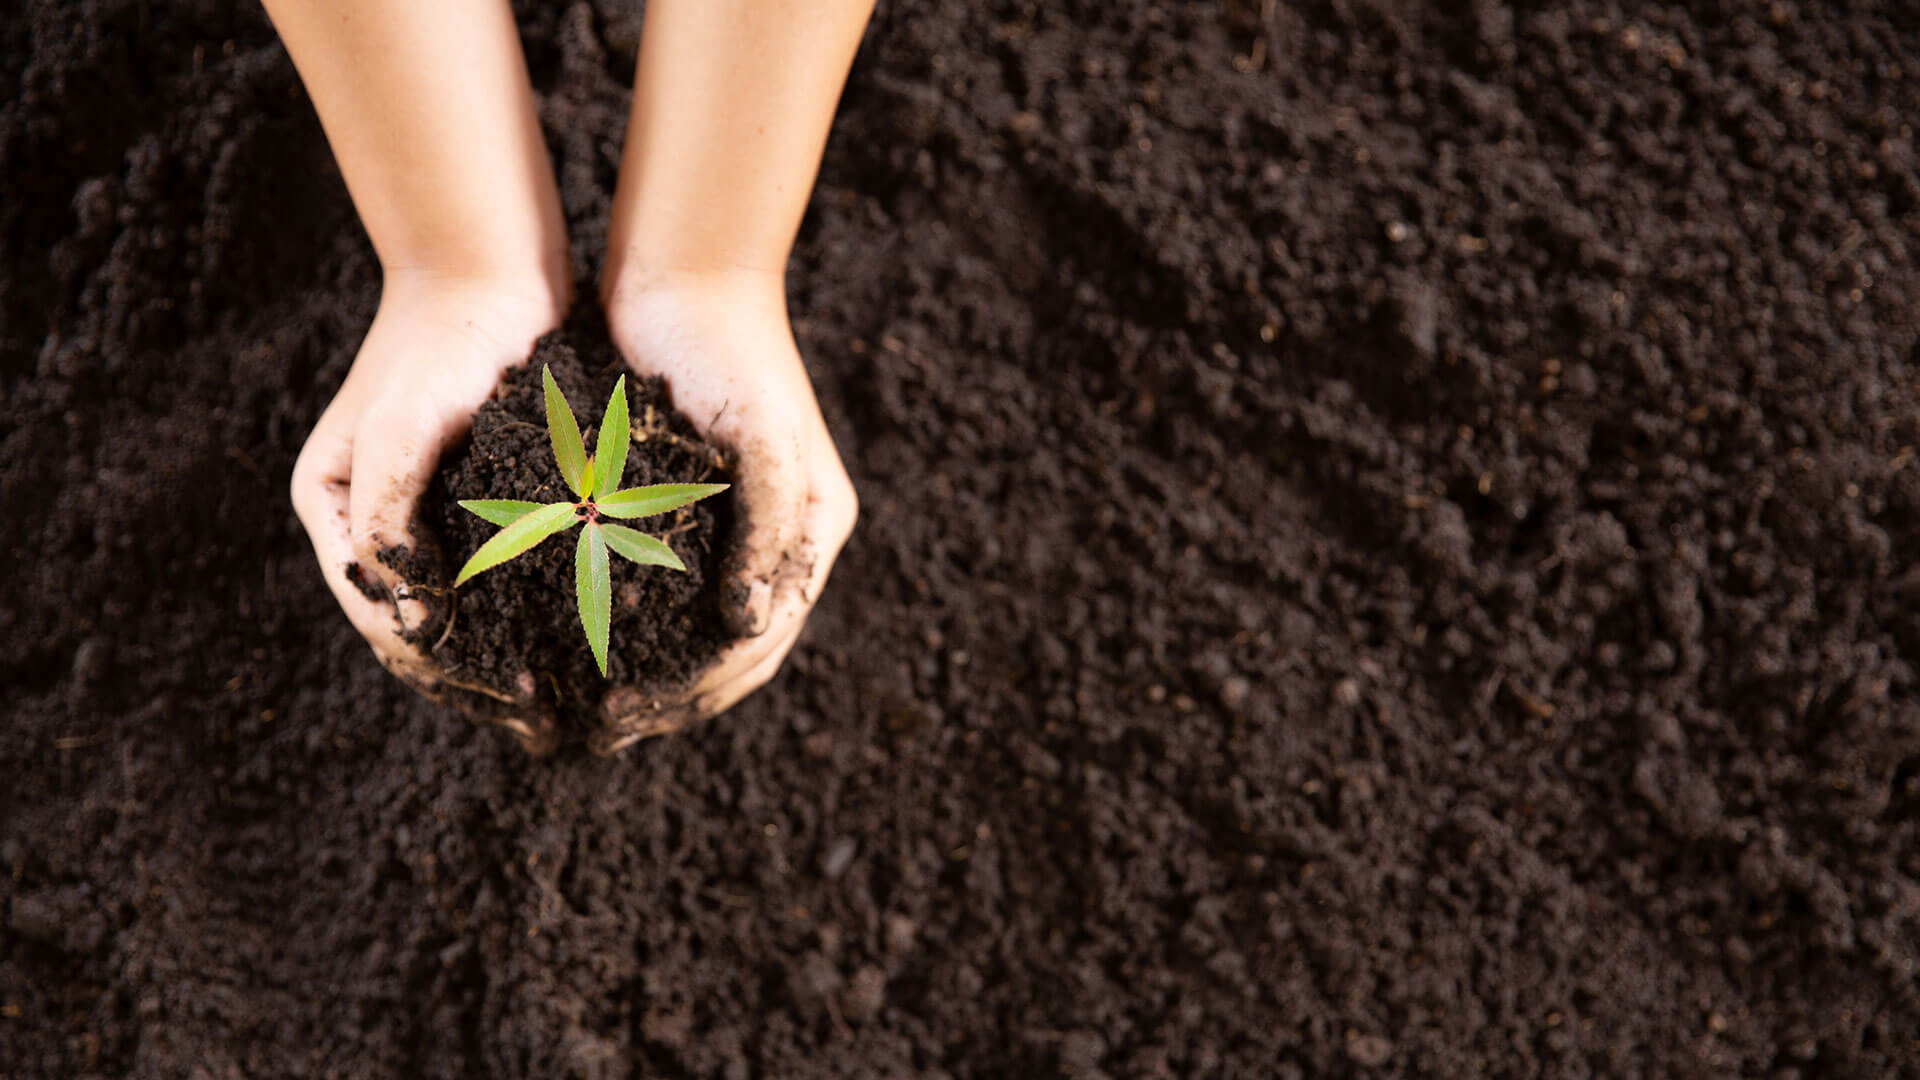 Supporting soil through sustainable procurement